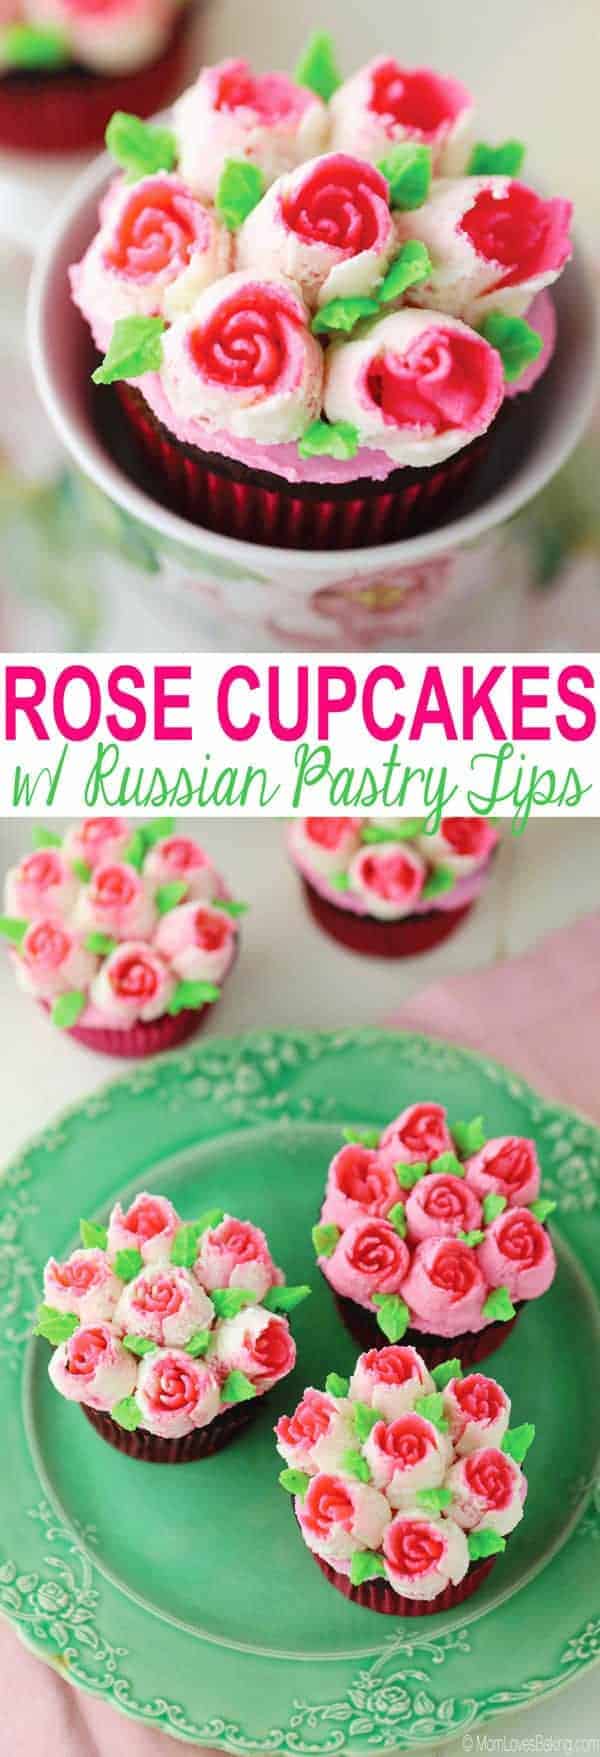 Rose Cupcakes with Russian Pastry Tips - Mom Loves Baking